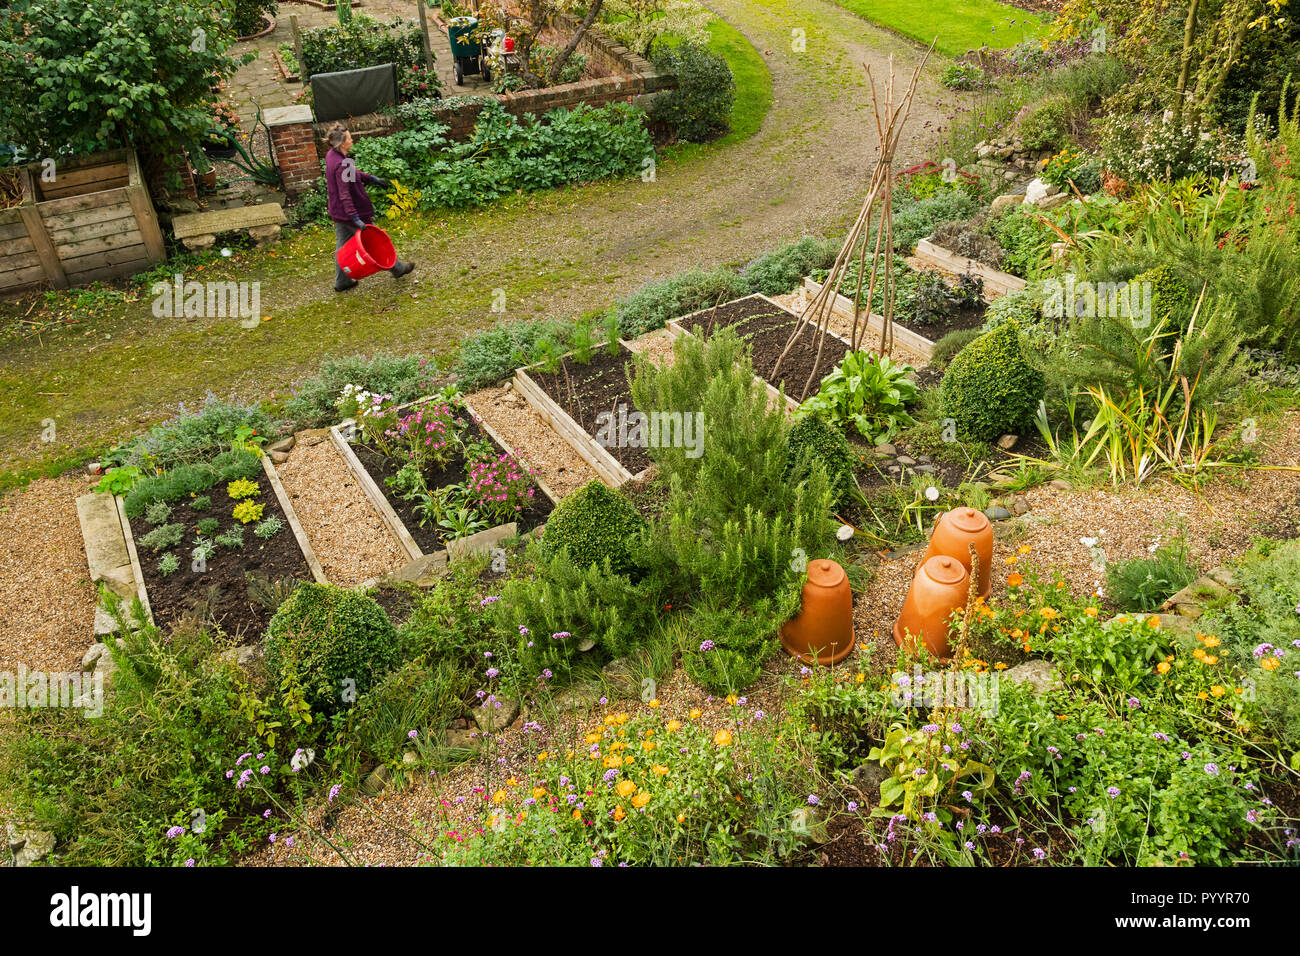 Gardener by raised timber beds with mixed organic produce (vegetables herbs, edible flowers) in kitchen garden - Grays Court, York, Yorkshire, England Stock Photo